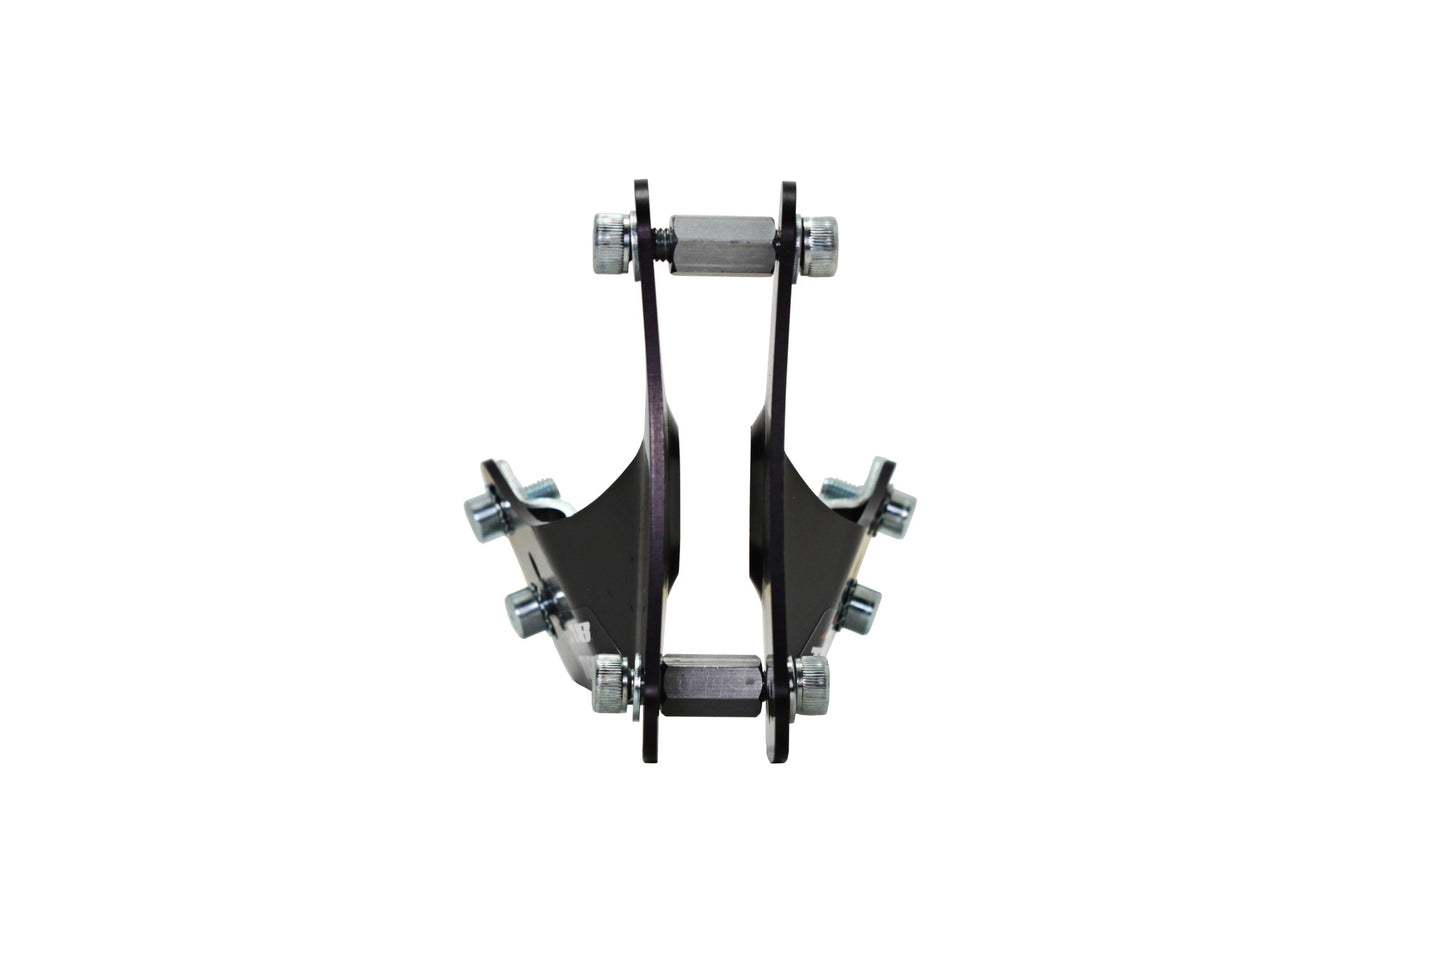 XLAB TURBO WING Carrier – Highly Adjustable & Lightweight (1388)